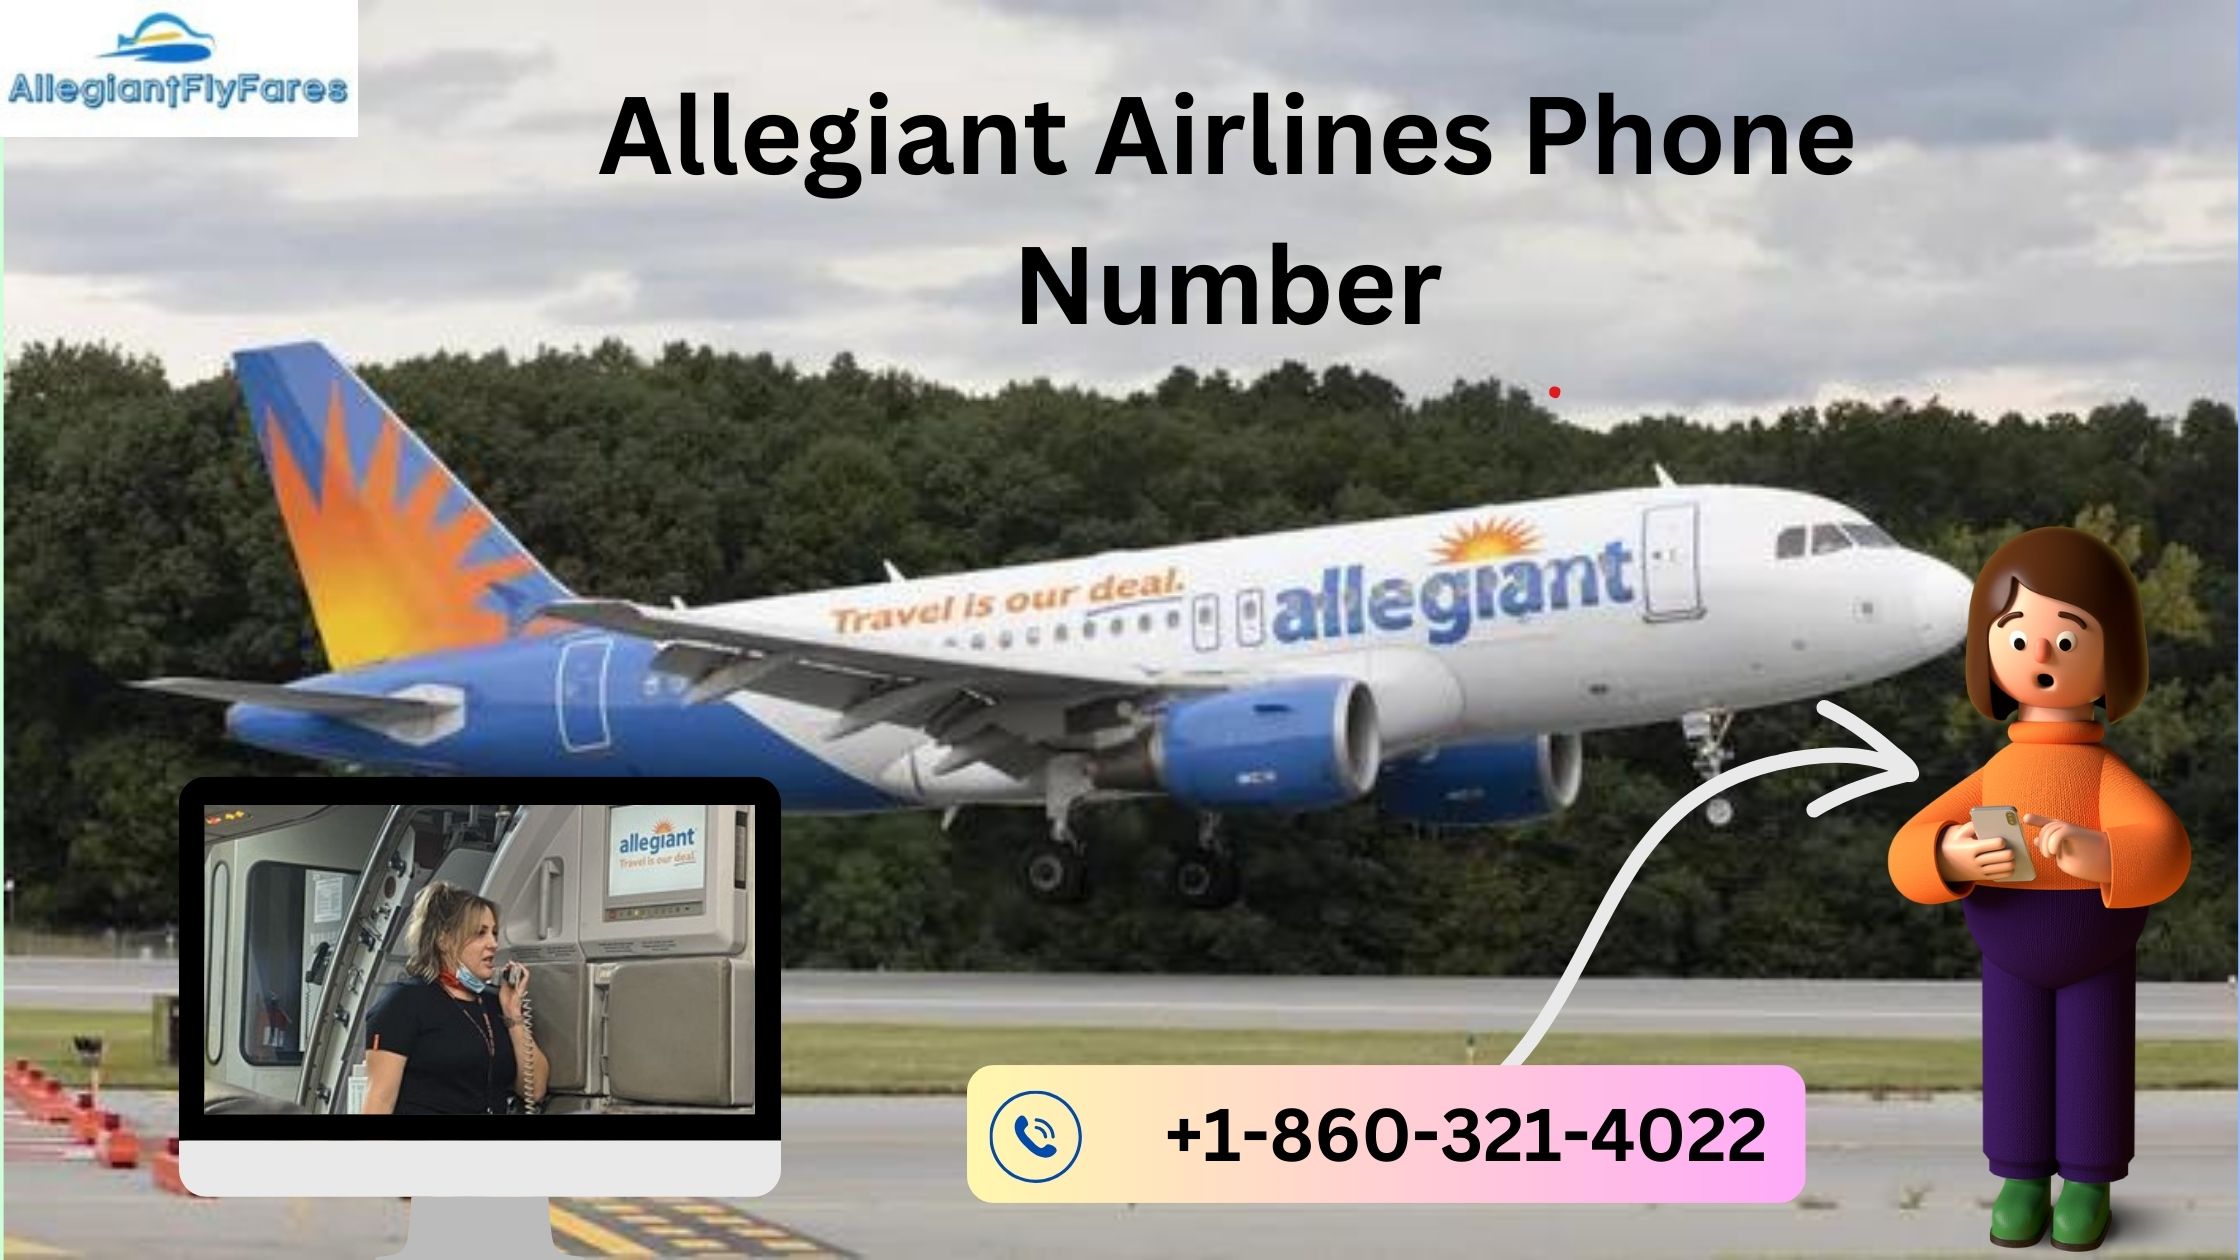 How Do I Speak To A Live Person At Allegiant Air?